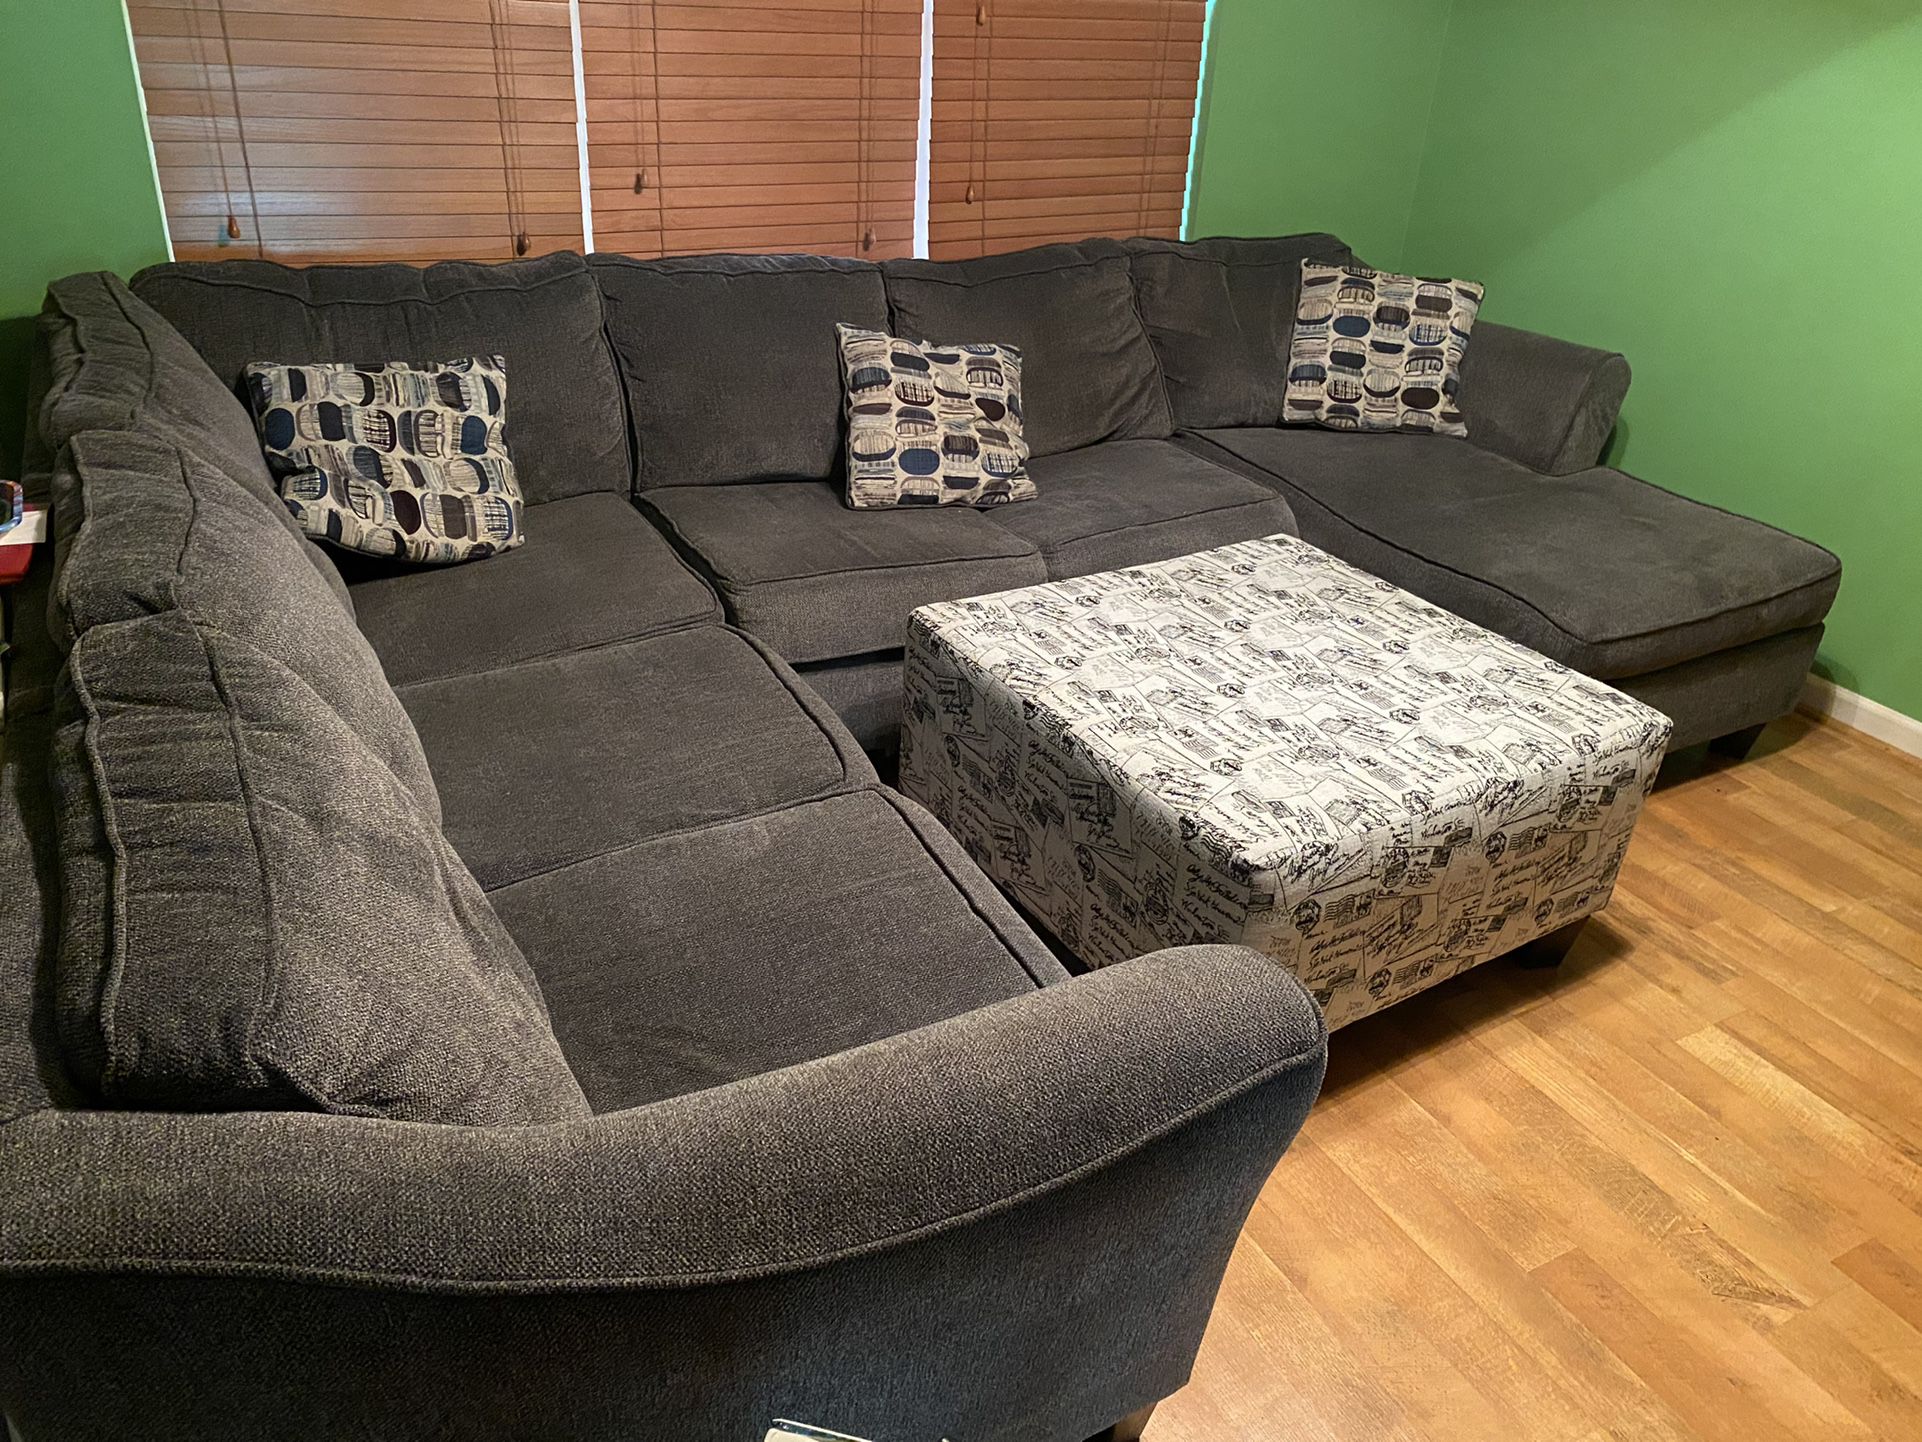 Large Grey Sectional With Stylish Ottoman